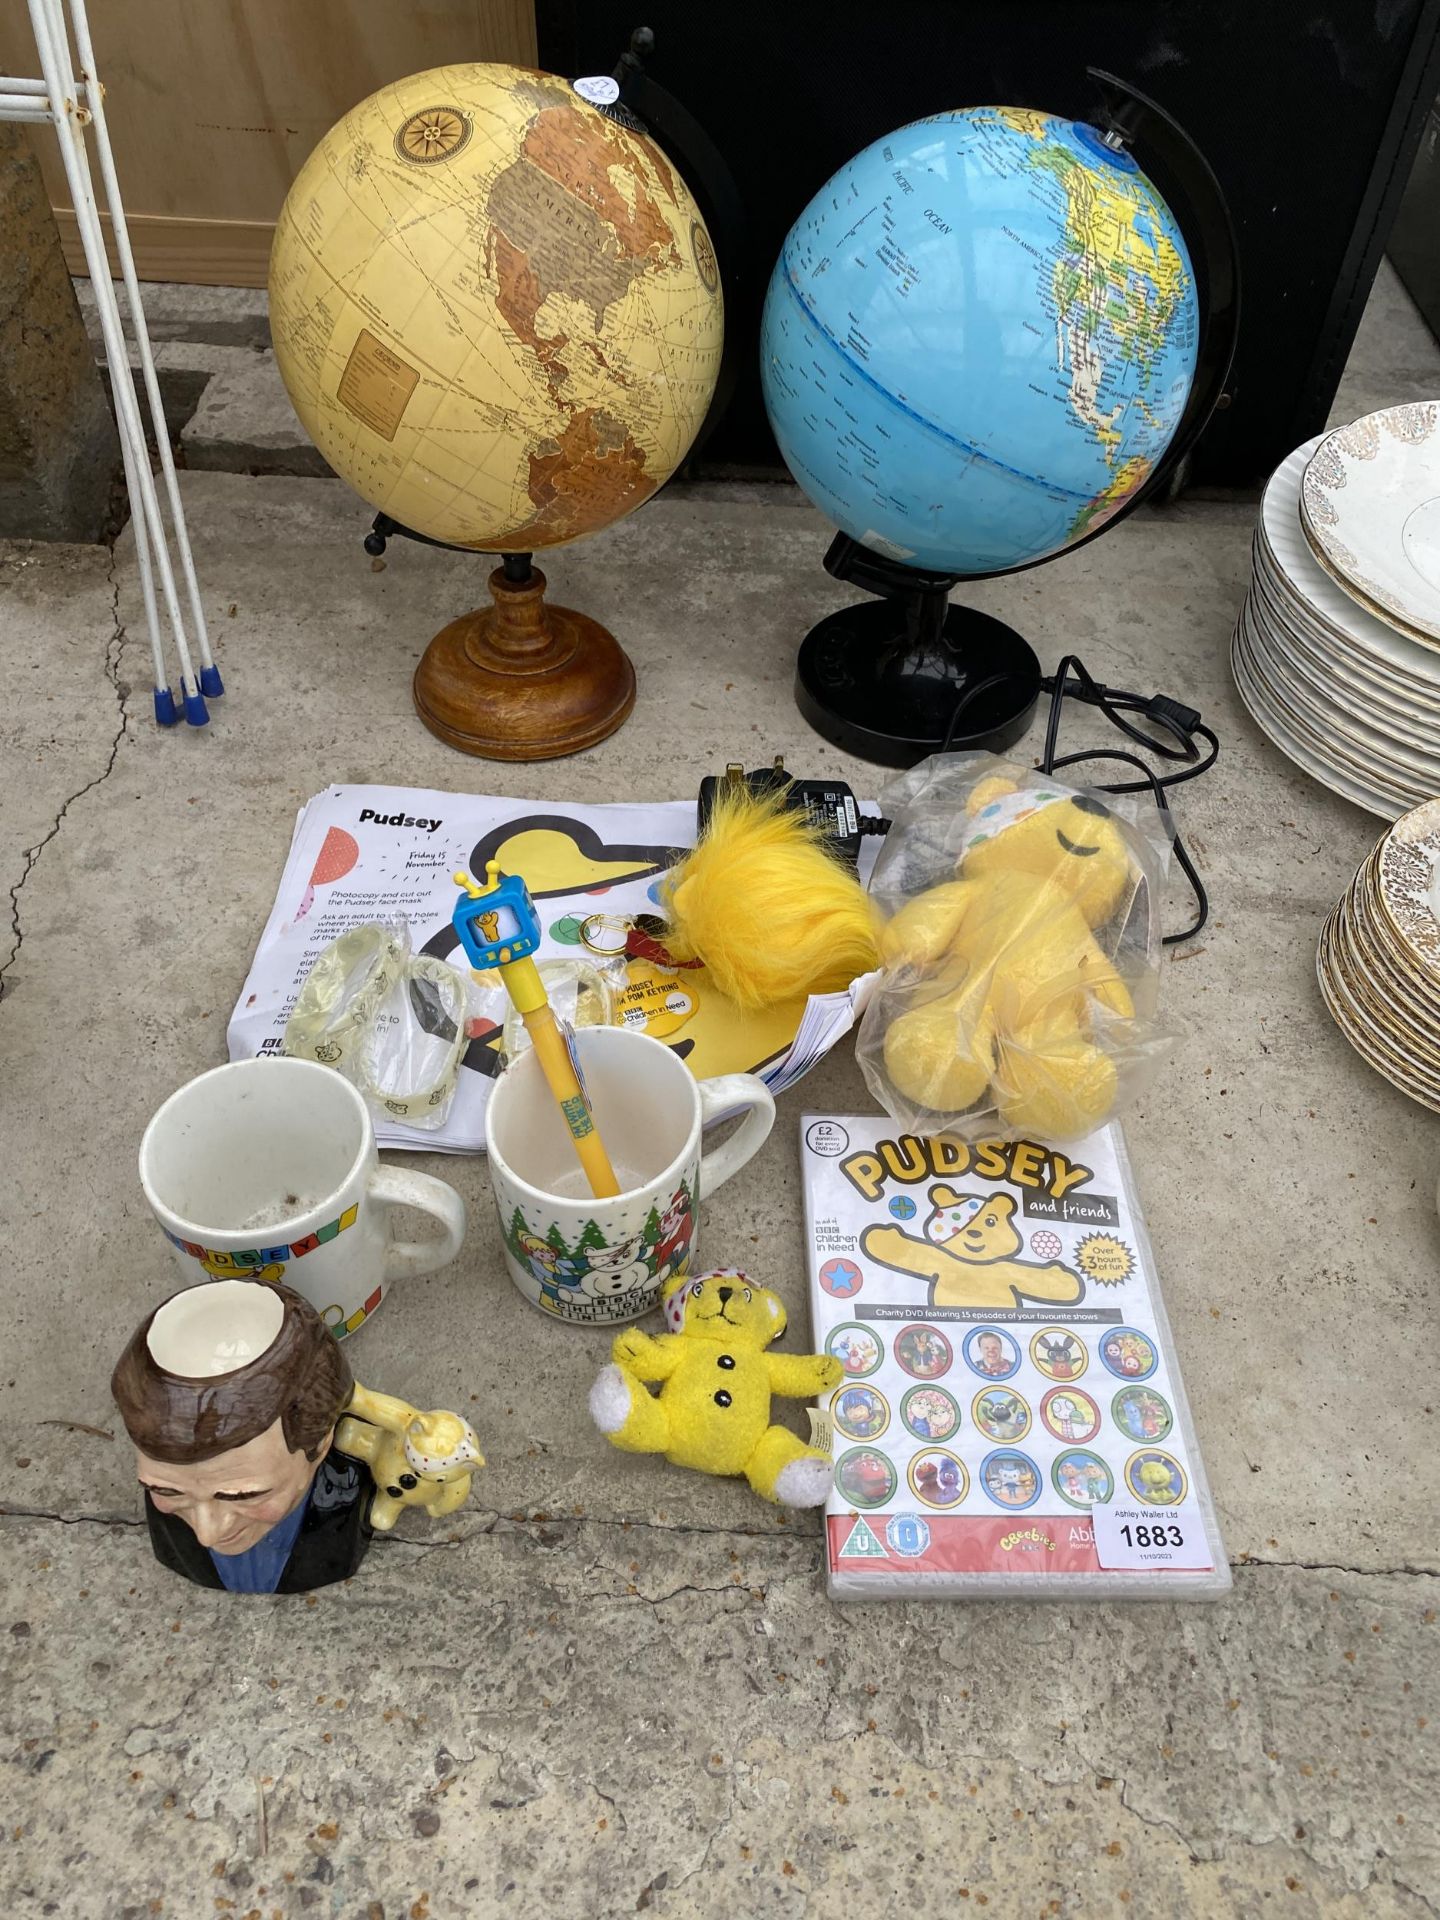 TWO GLOBES AND AN ASSORTMENT OF PUDSEY BEAR ITEMS ETC